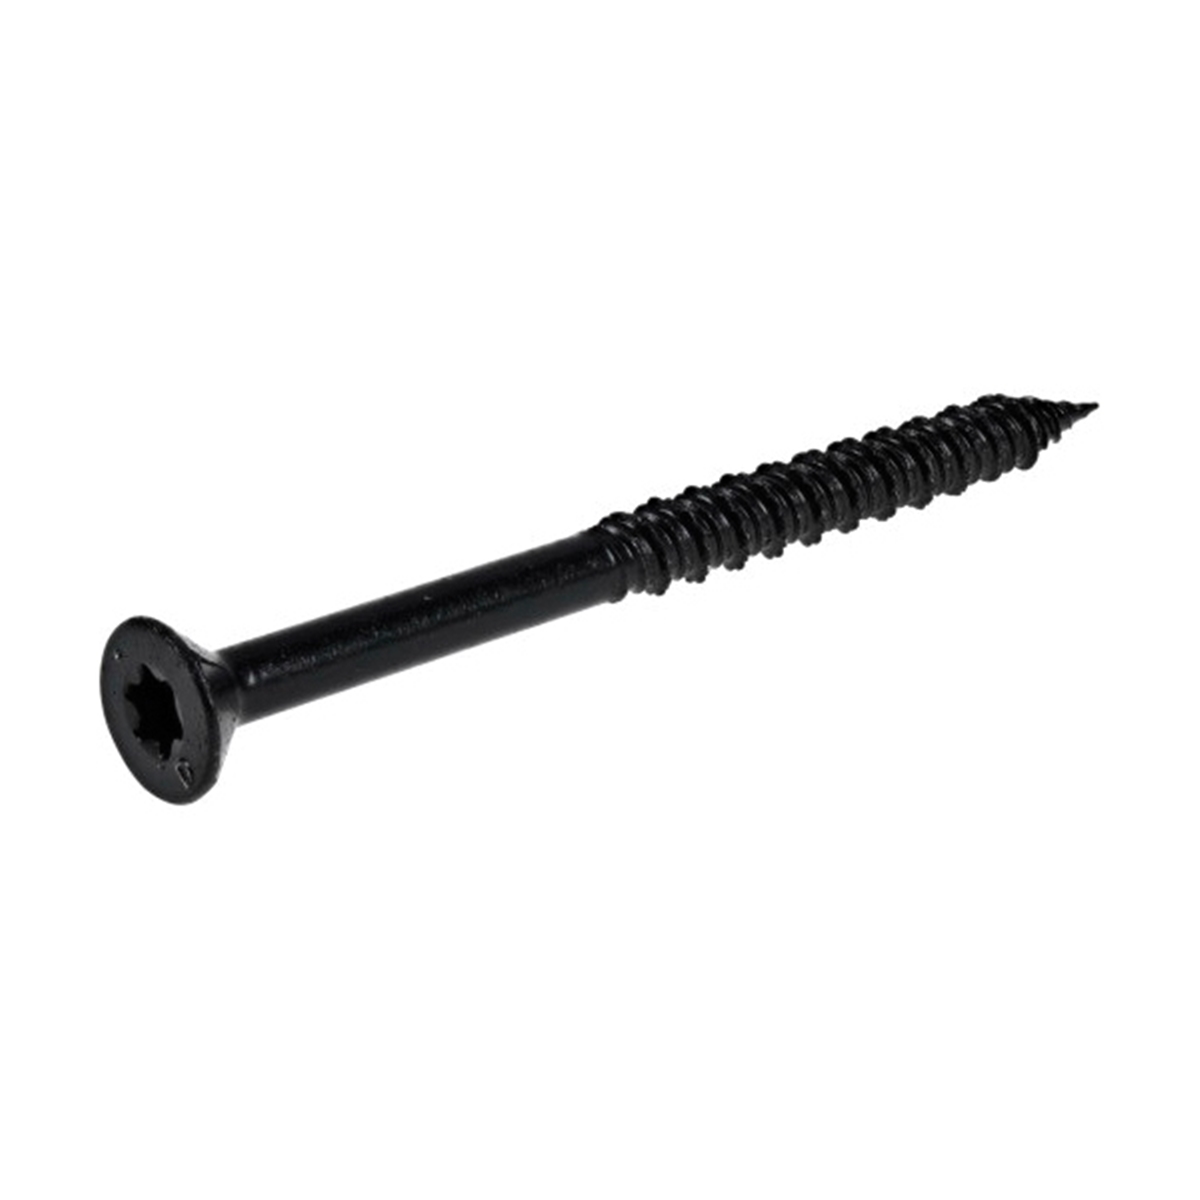 376609 Concrete Screw Anchor, 1/4 in Dia, 3-1/4 in L, Carbon Steel, Epoxy-Coated, 100/PK